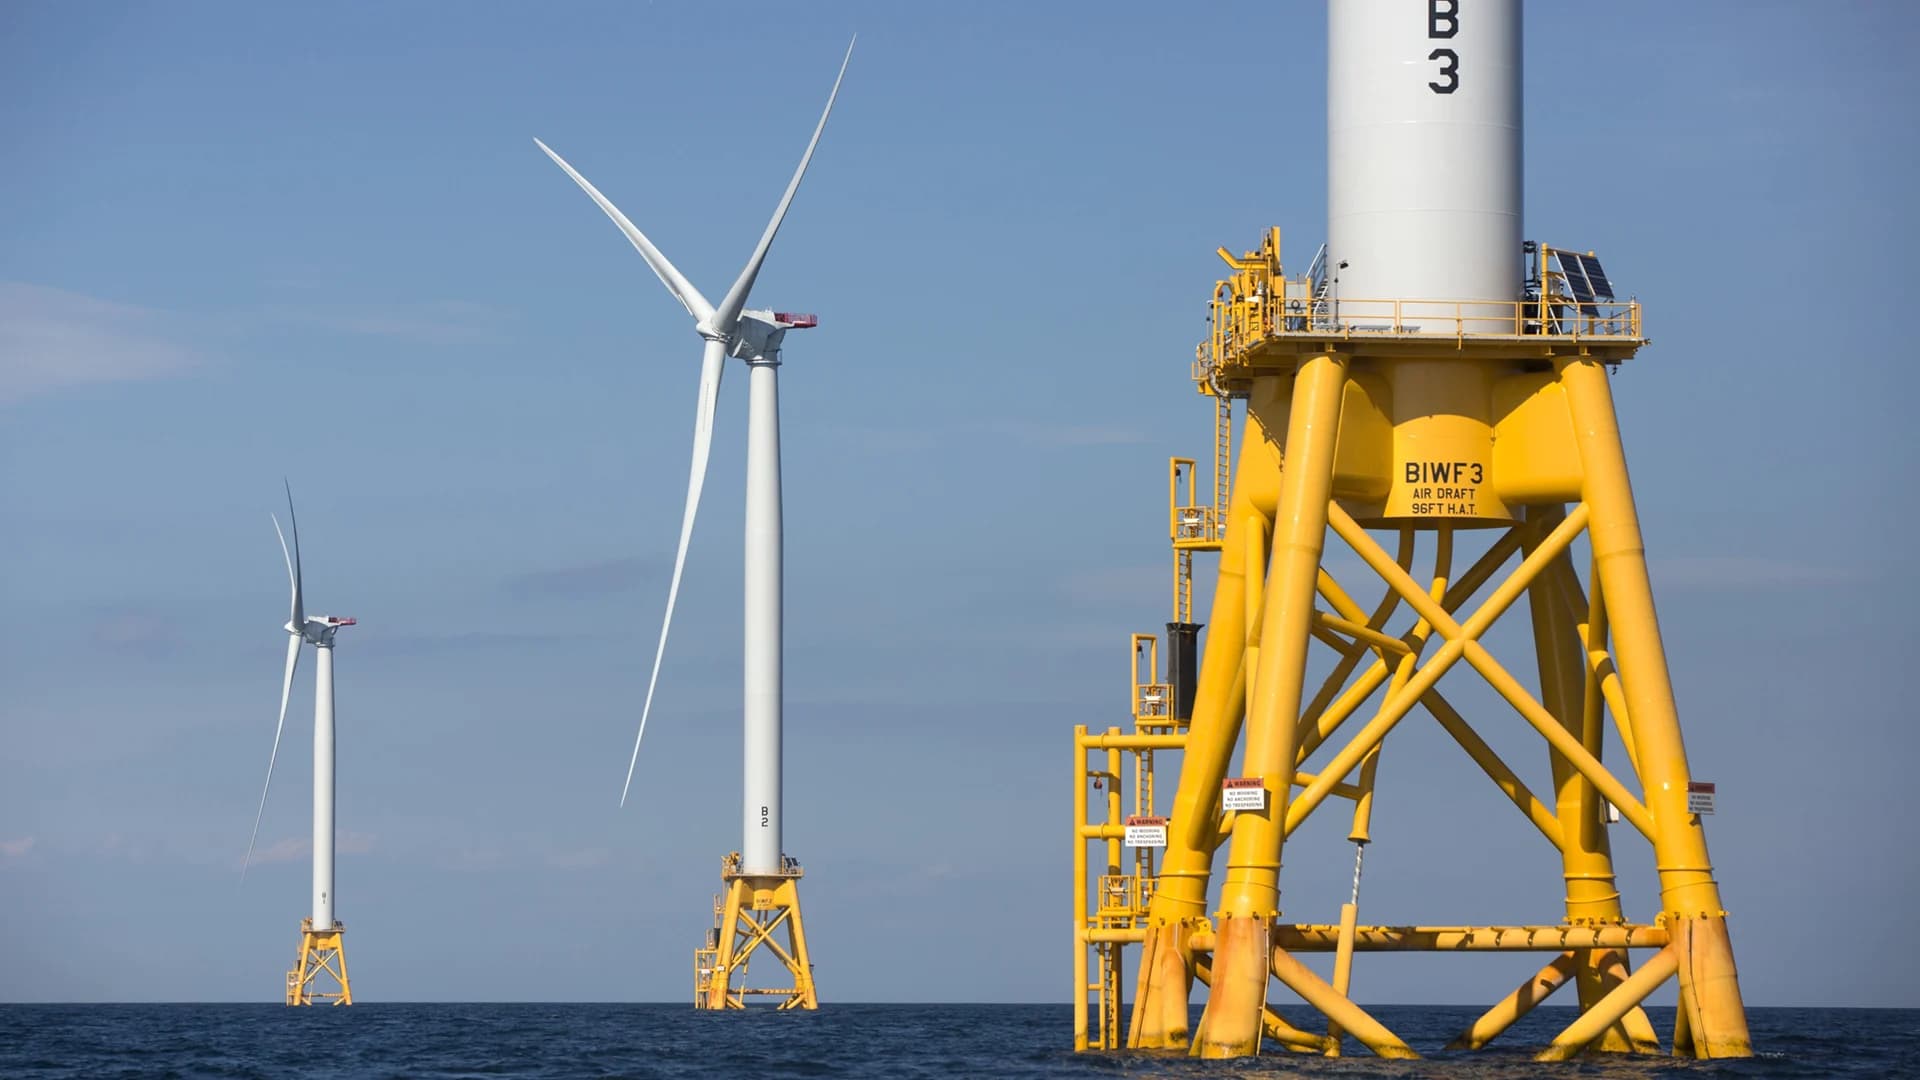 President Biden boosts offshore wind energy, wants to power 10M homes